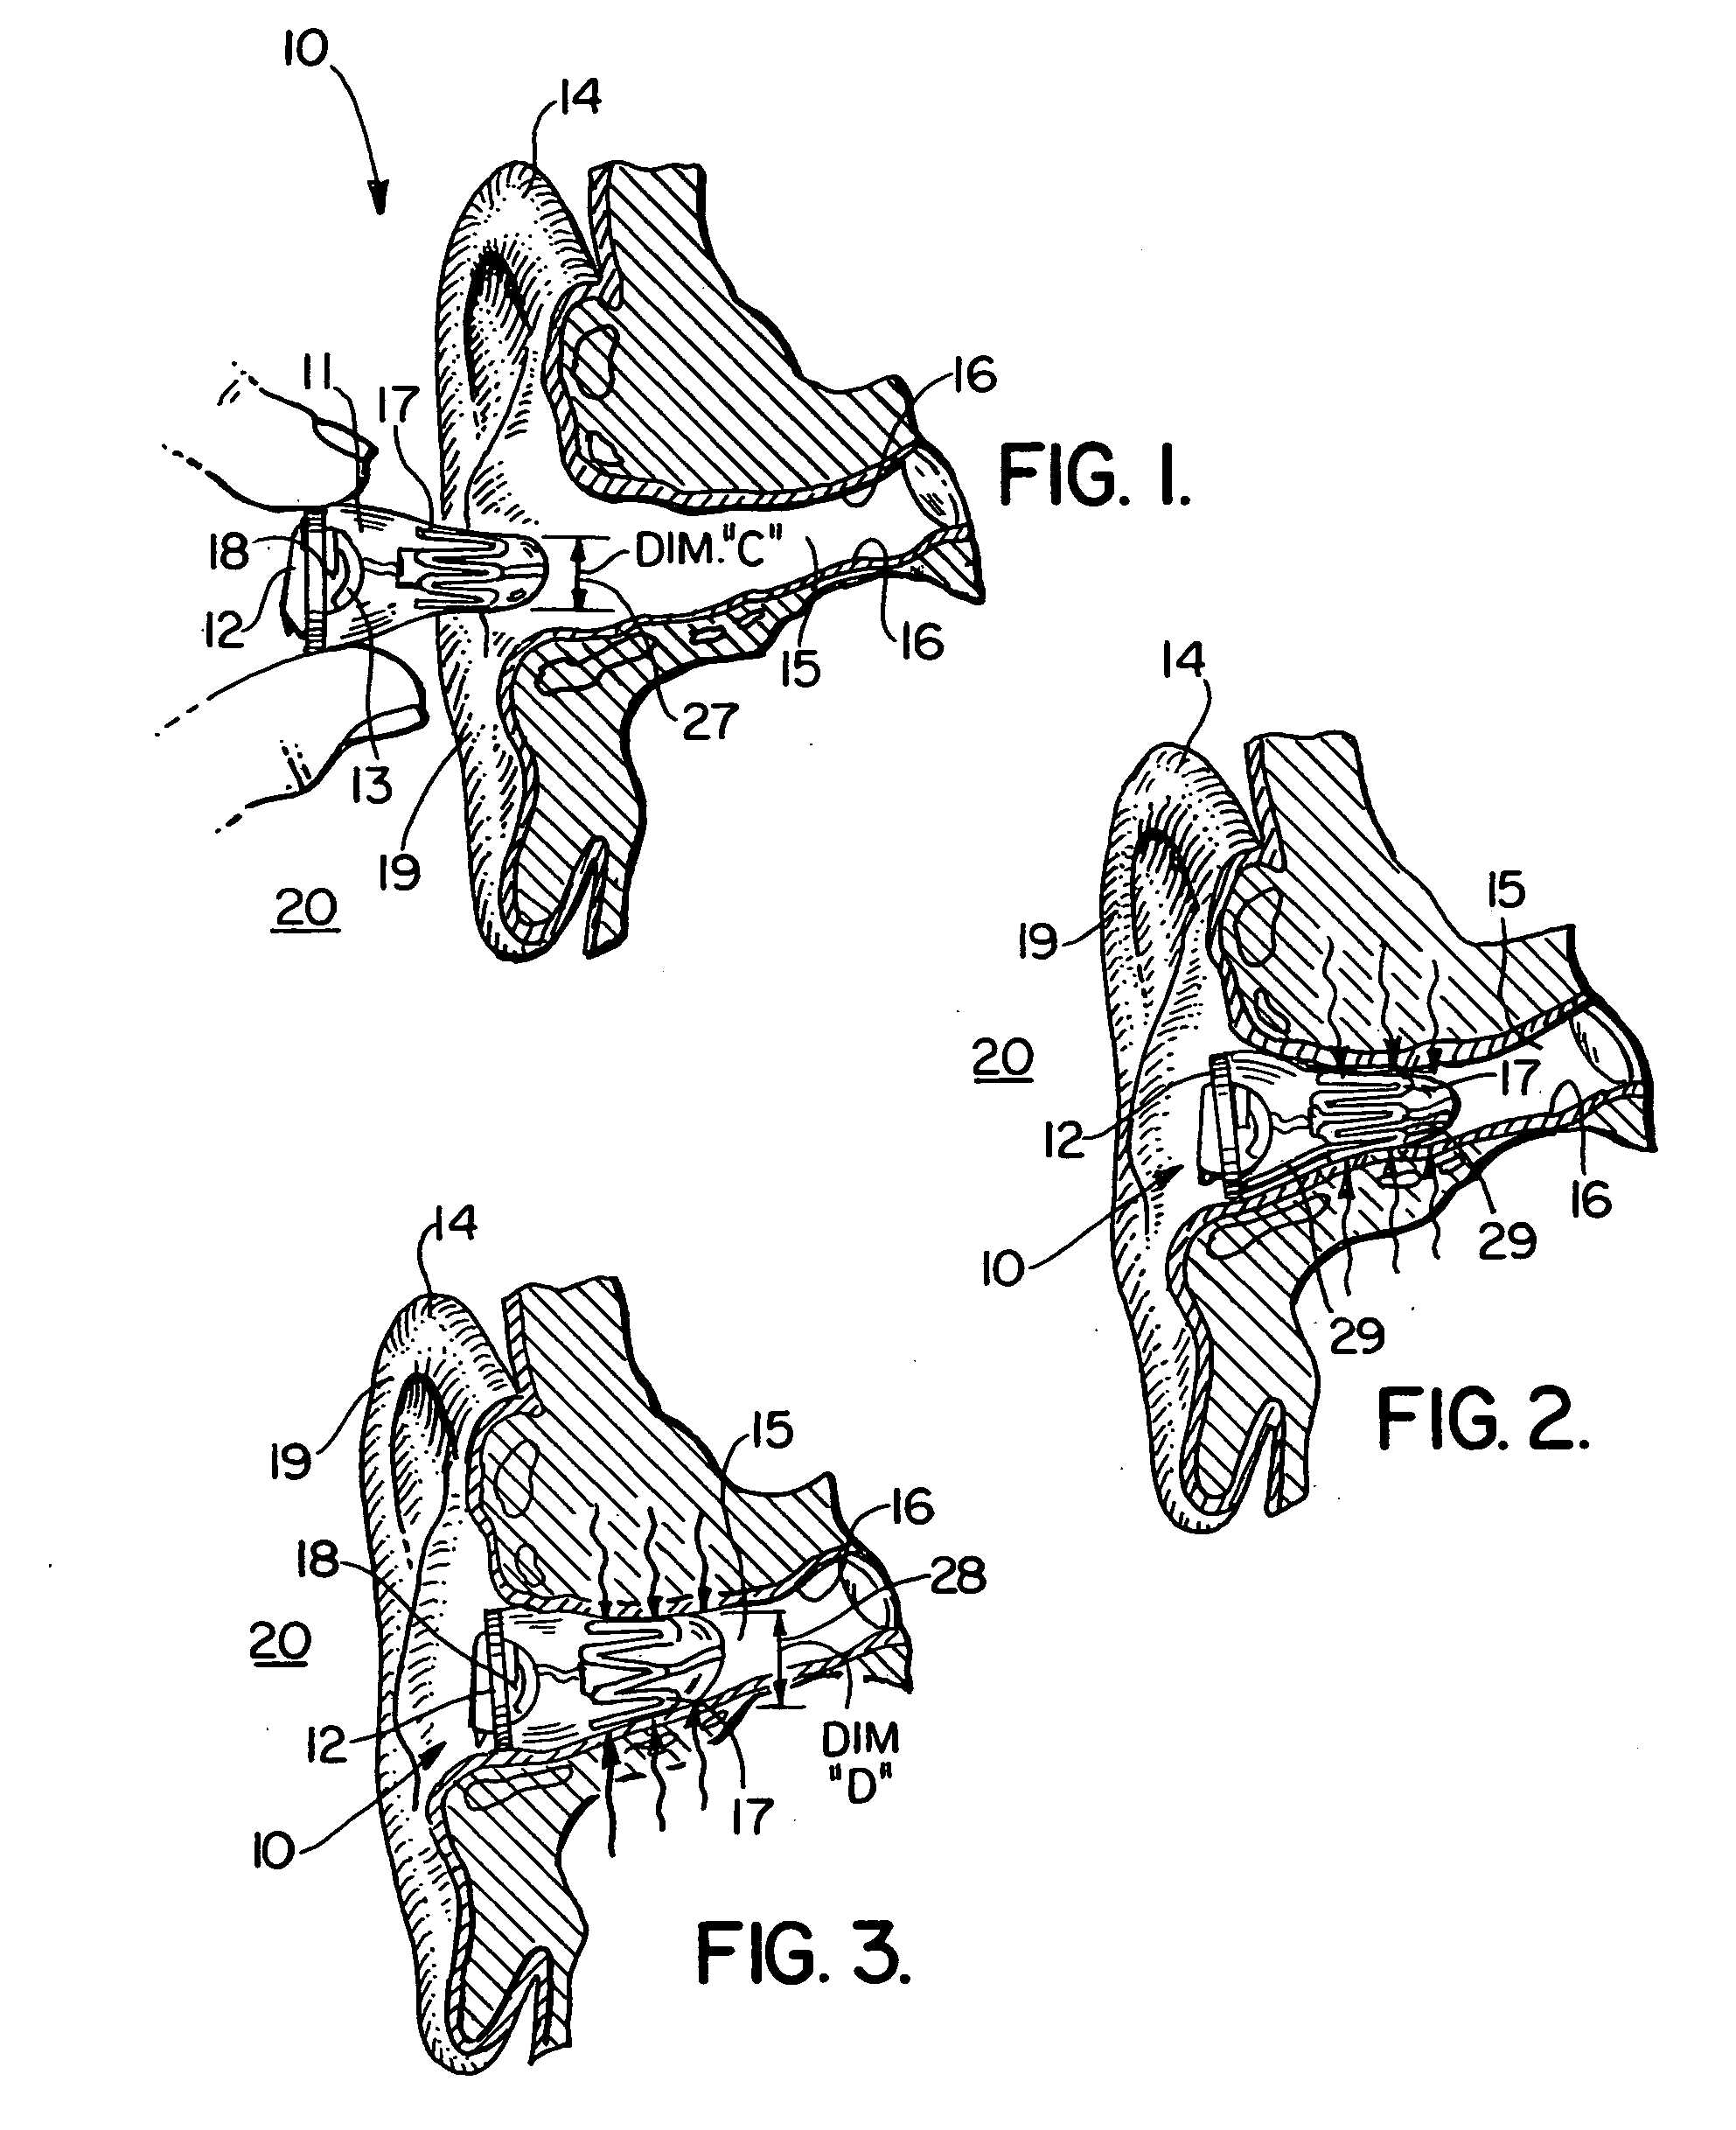 Self forming in-the-ear hearing aid